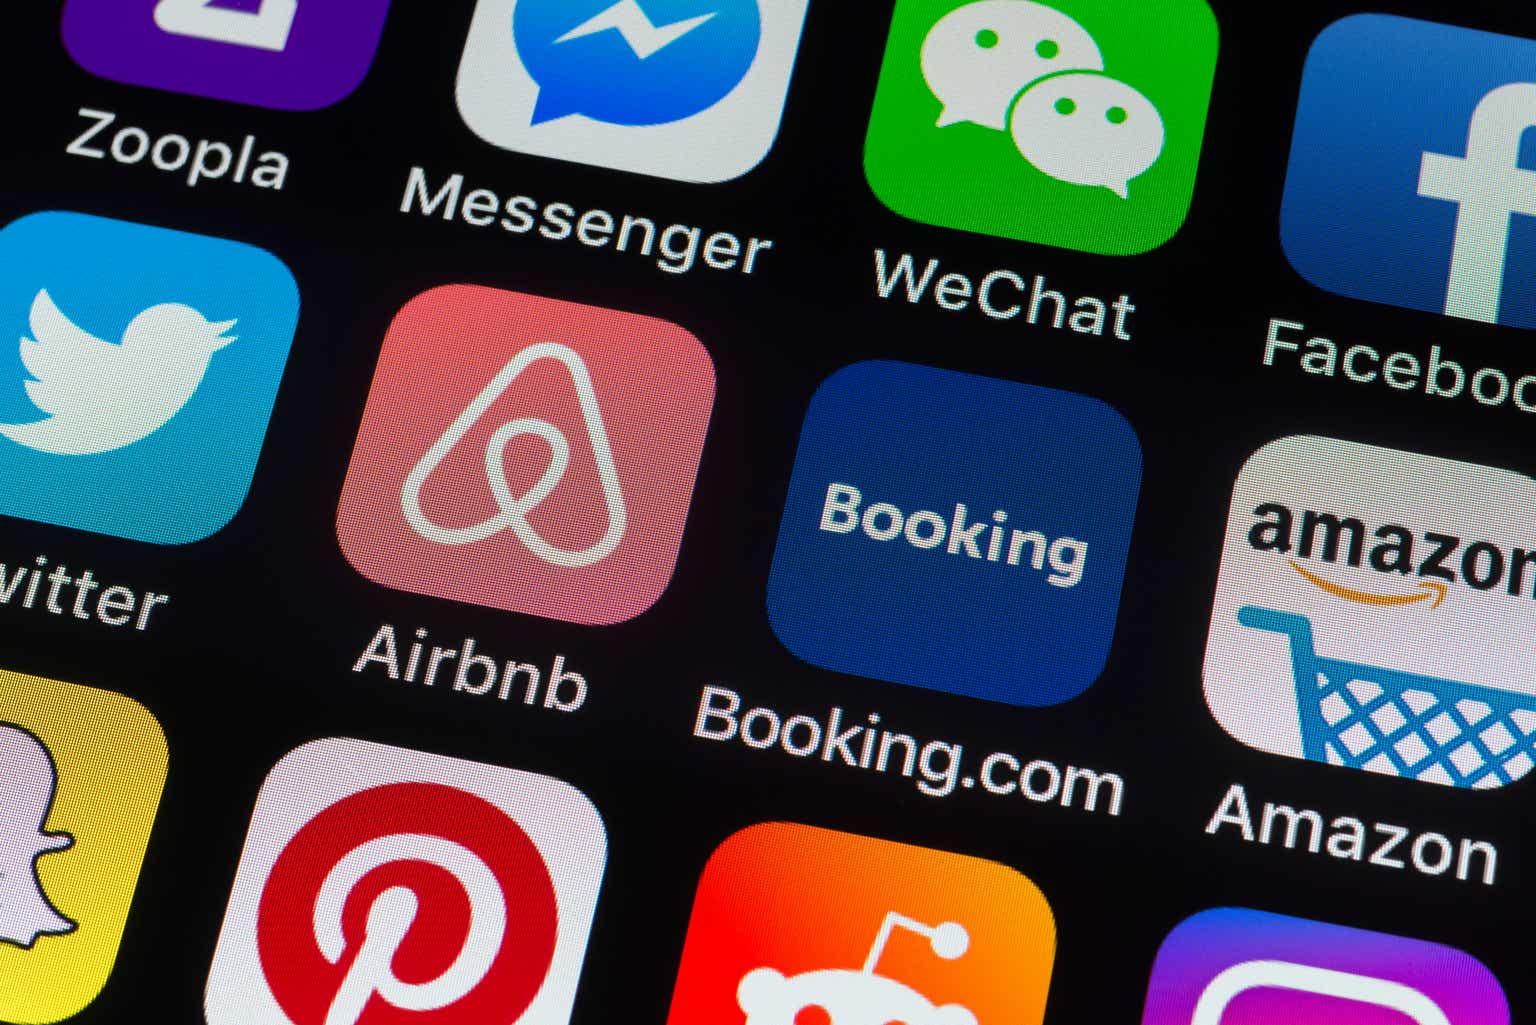 Zoopla. Booking Airbnb. Airbnb, booking.com,. Phone with booking Airbnb.